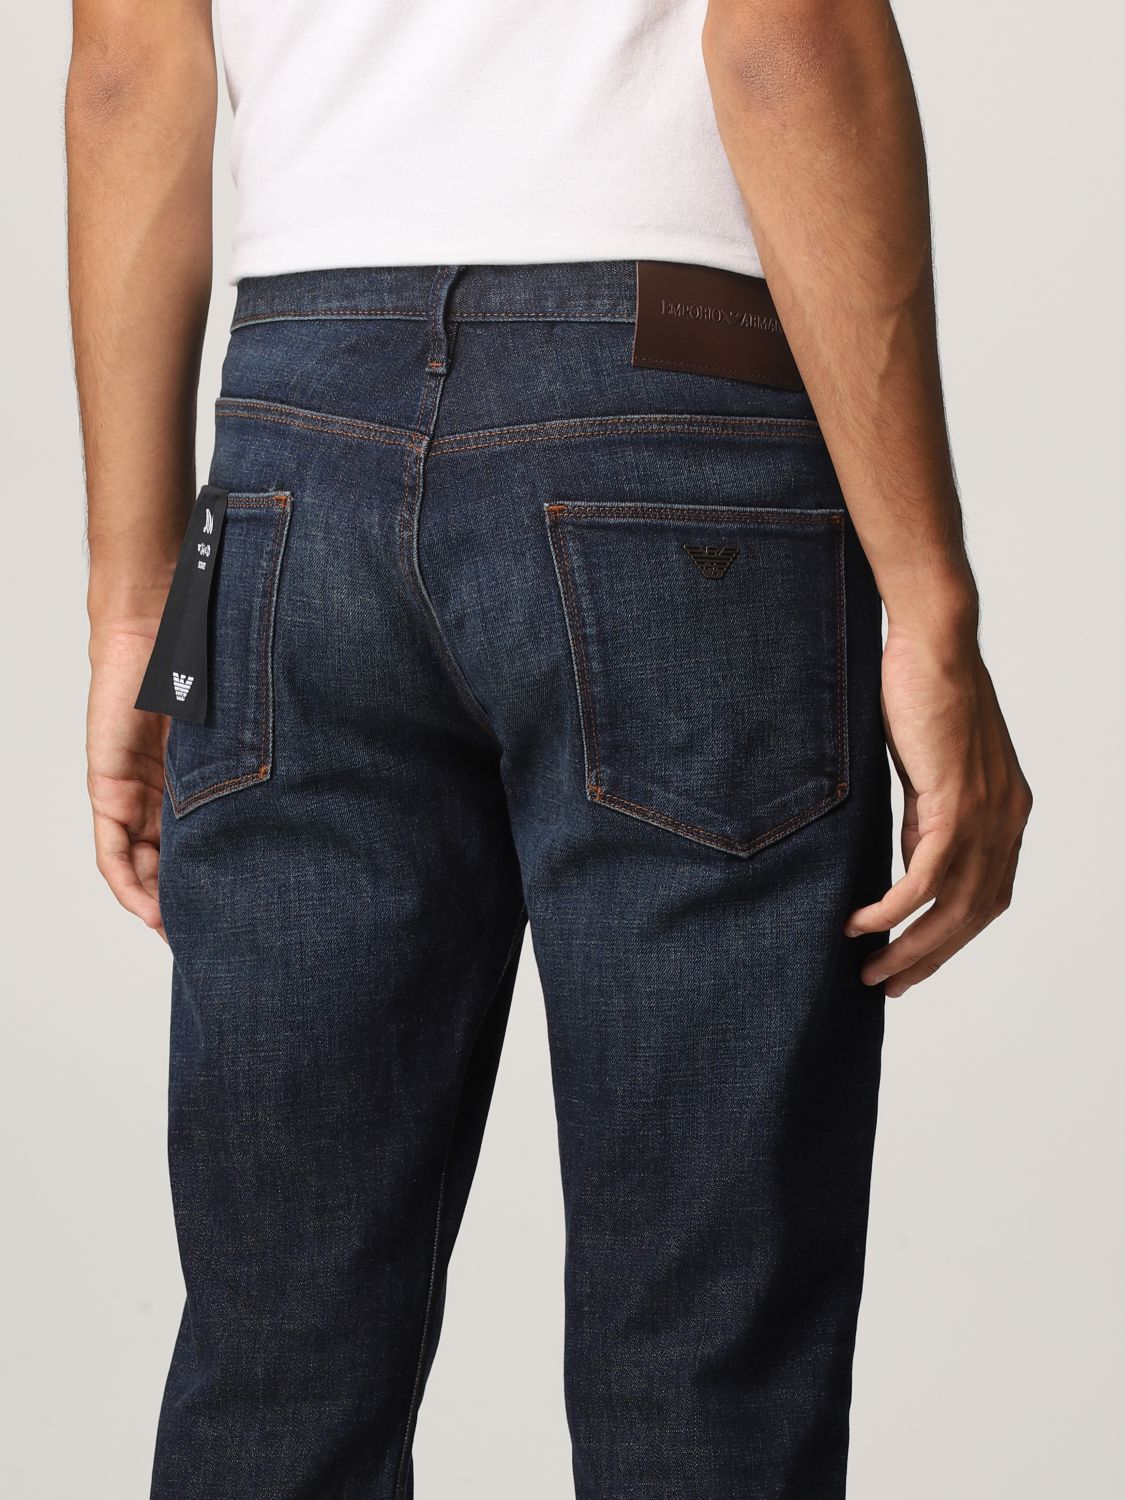 Emporio Armani jeans in washed denim with logo